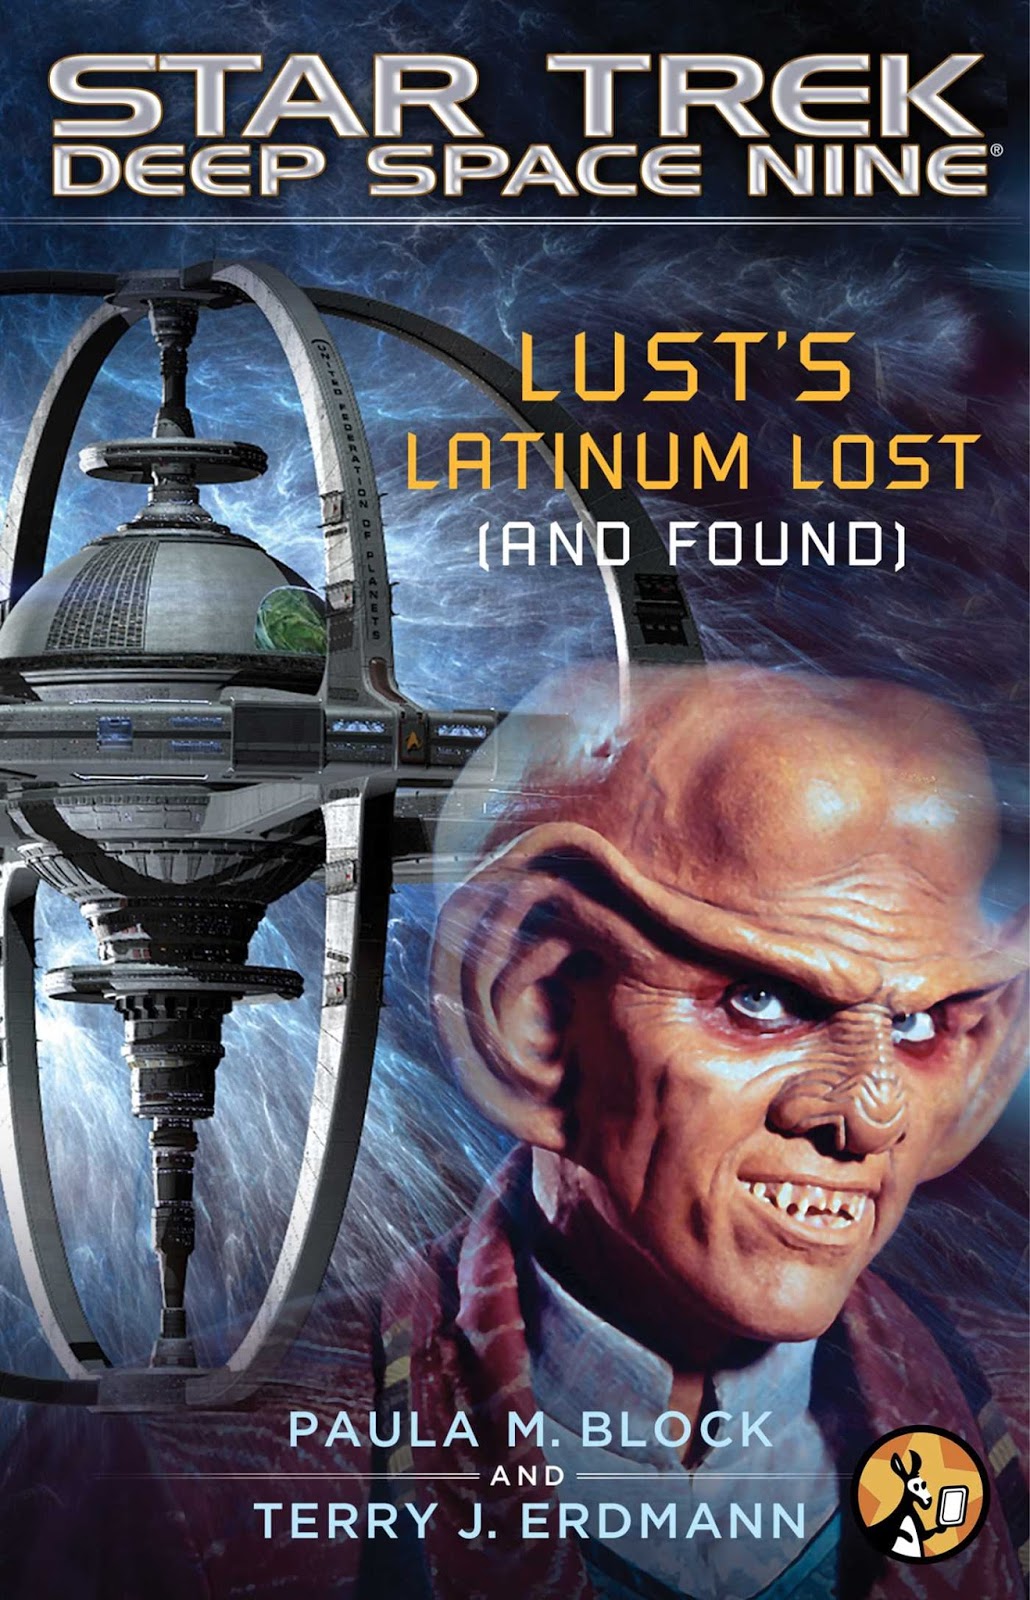 “Star Trek: Deep Space Nine: Lust’s Latinum Lost” Review by Lessaccurategrandmother.blogspot.com